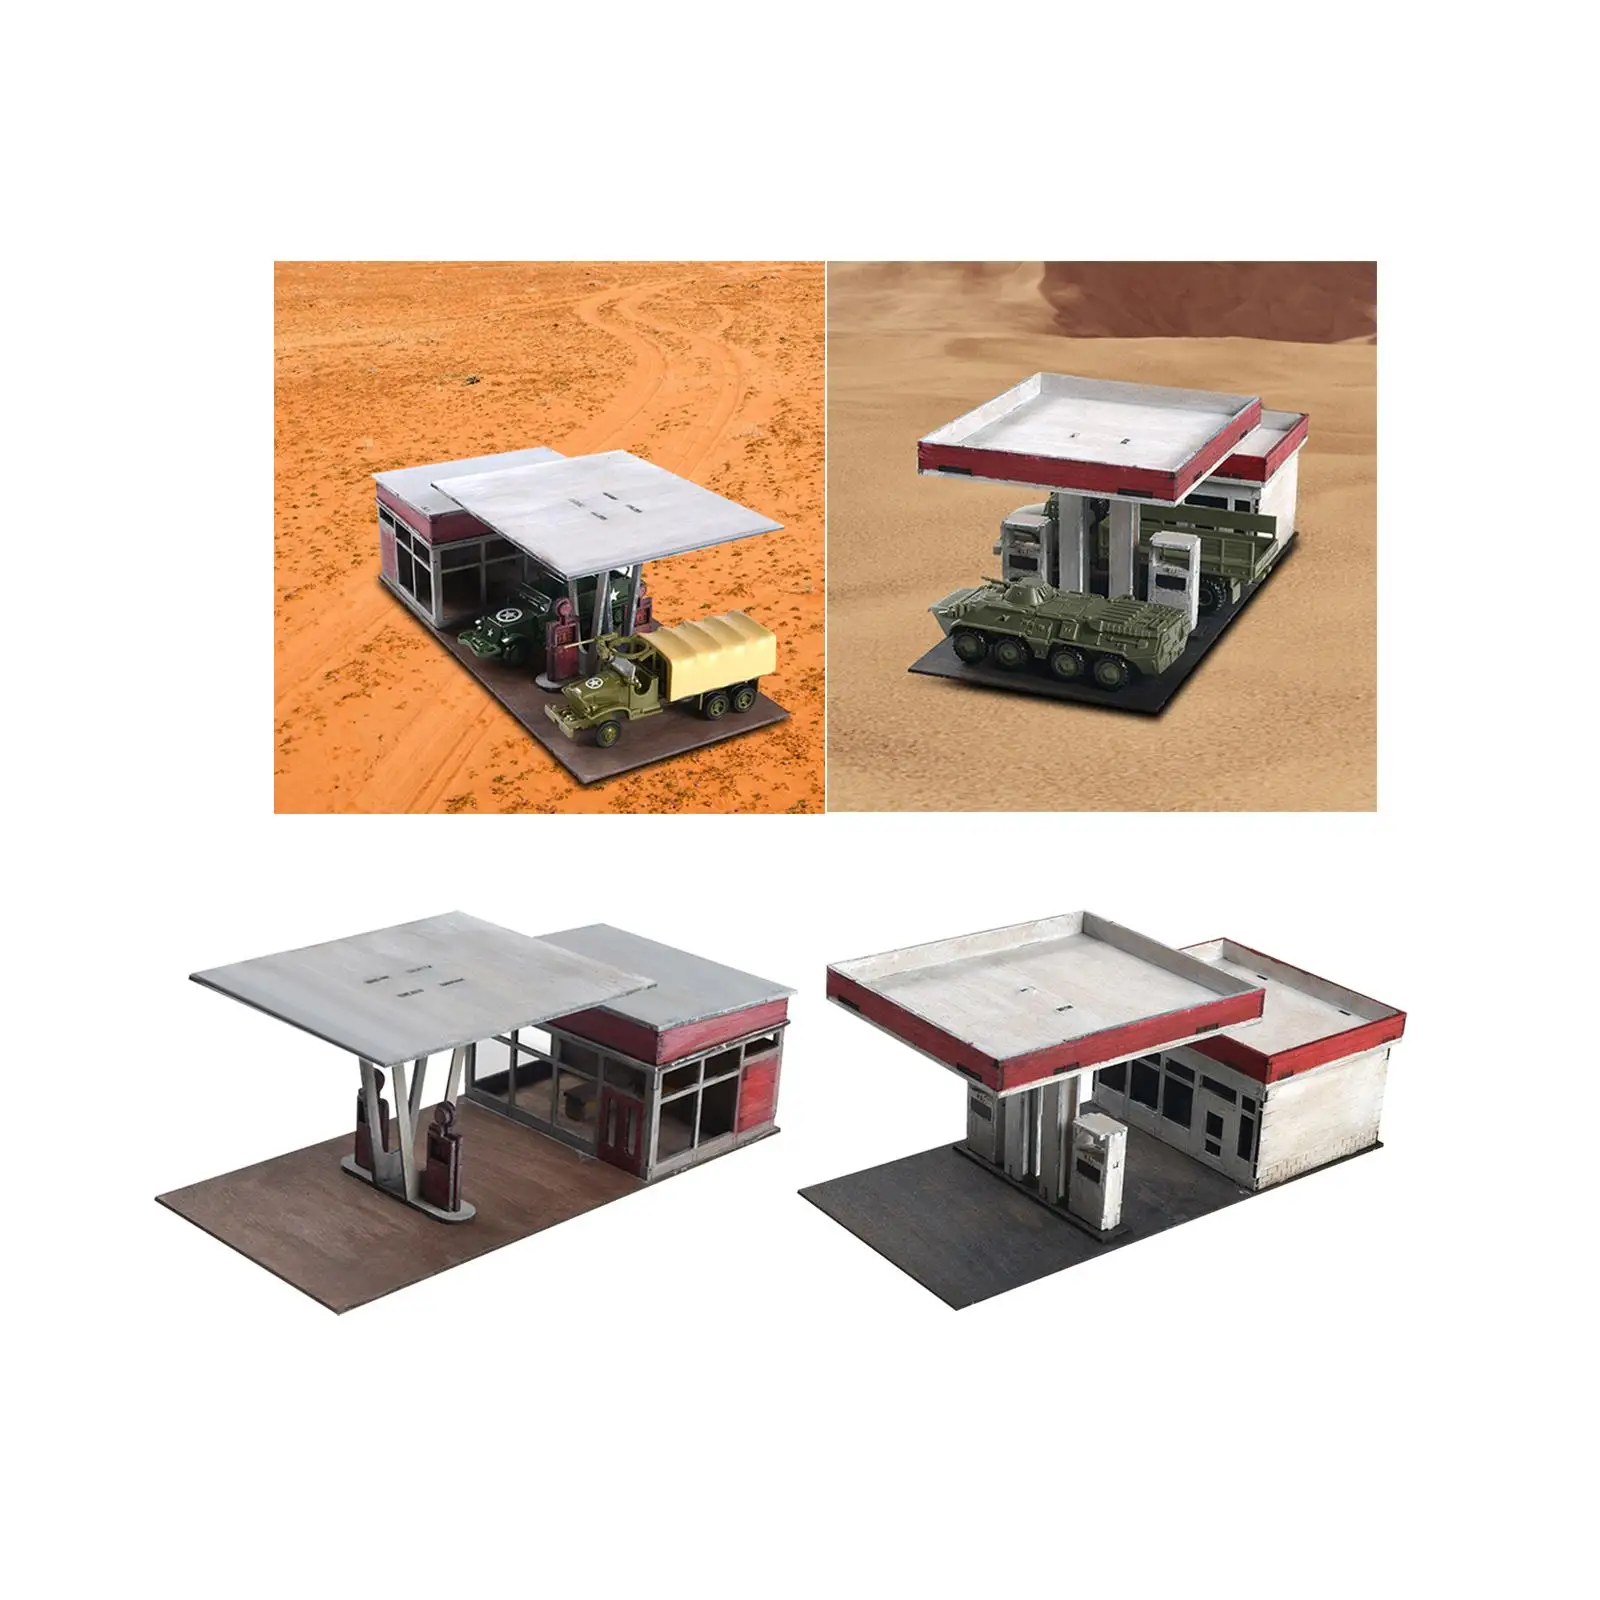 1:72 1:64 Handmade Miniature House Innteractive 3D Puzzles Gas Station Architecture Scene for Architecture Model Model Railway